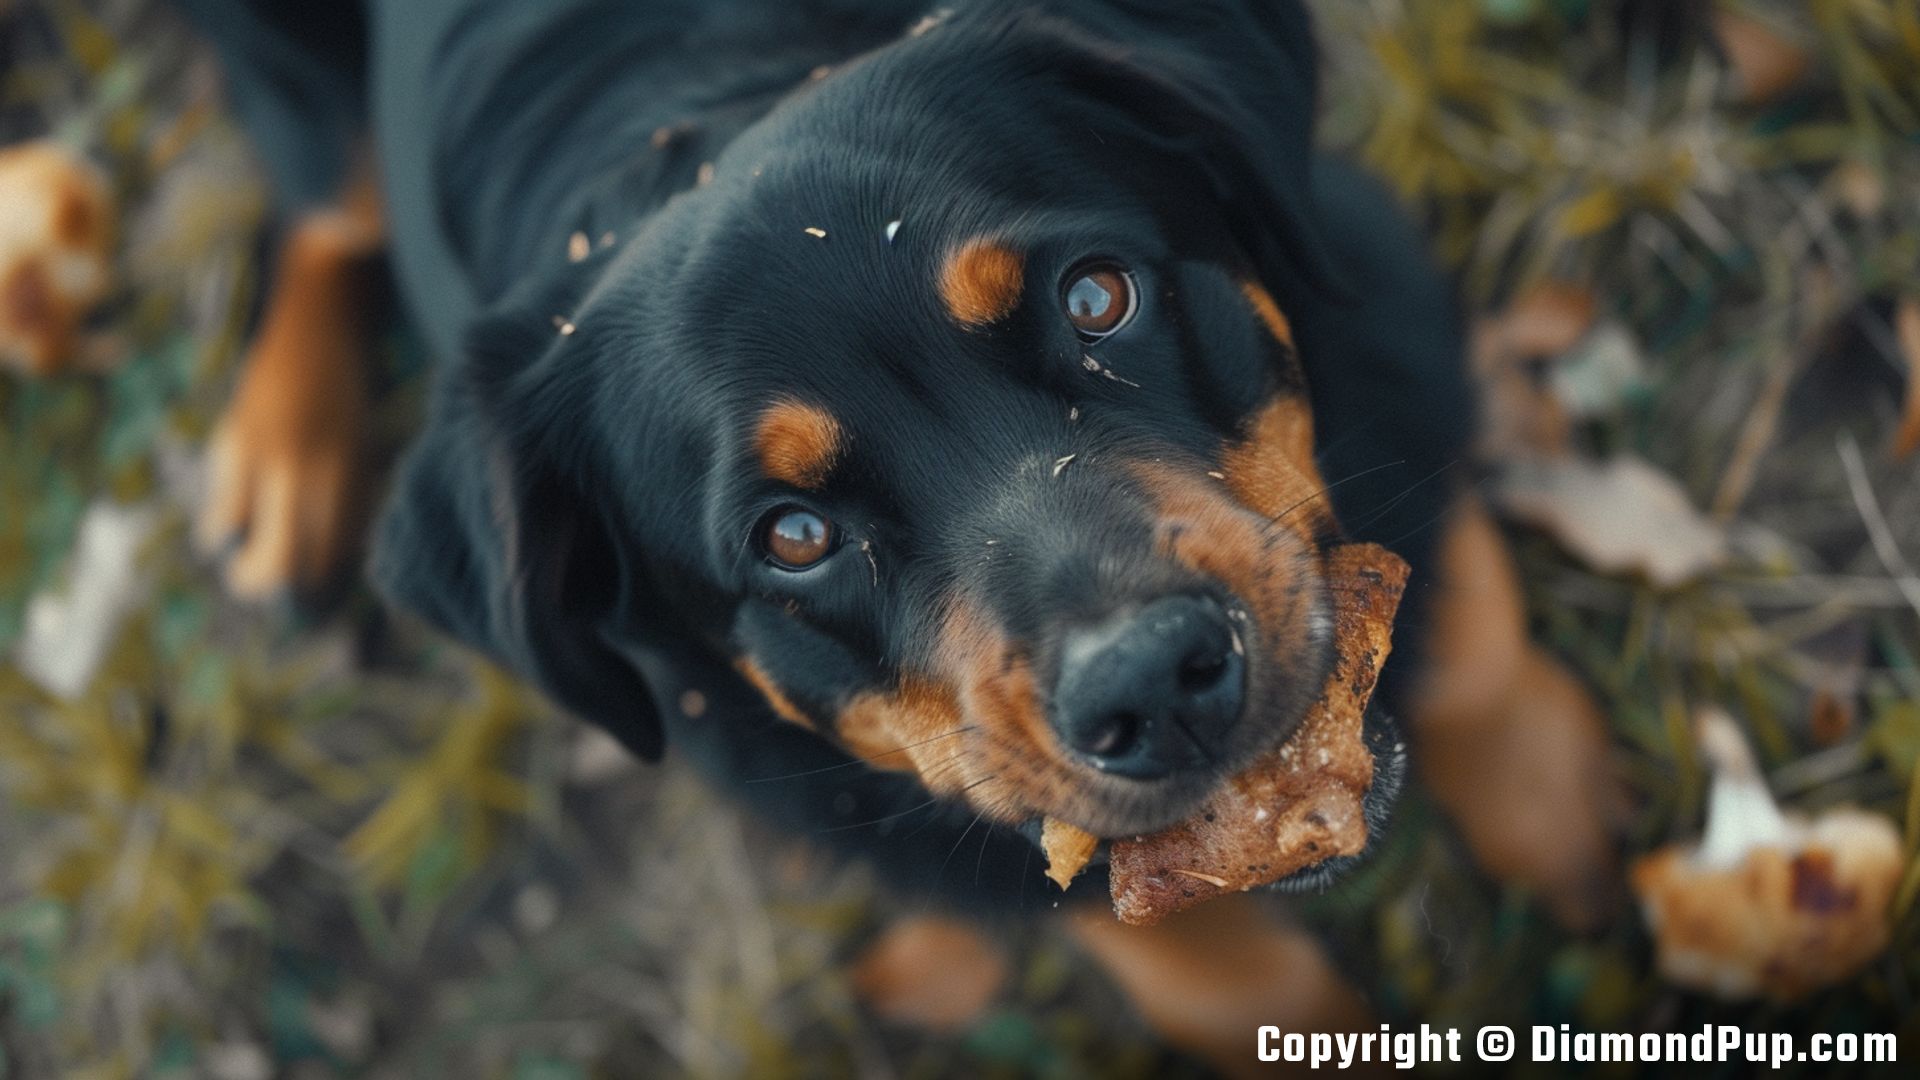 Image of a Cute Rottweiler Snacking on Chicken